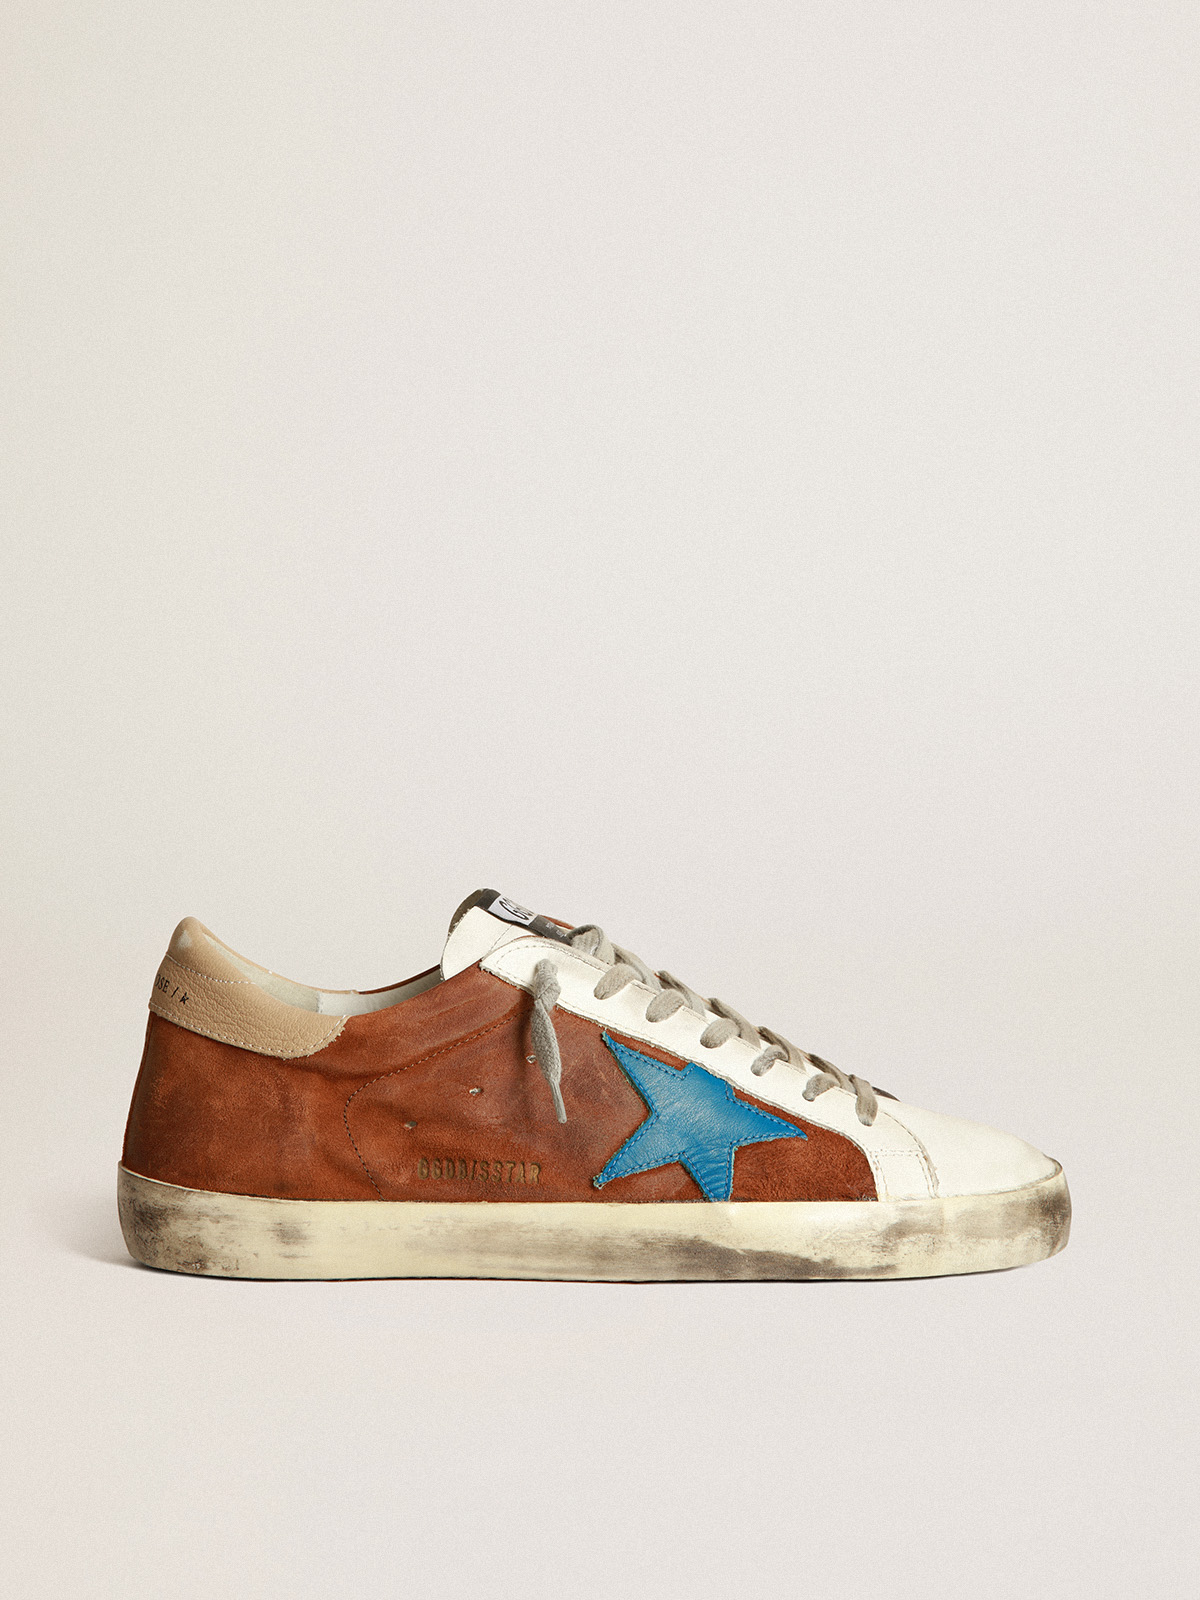 Super-Star sneakers in brown suede with a navy blue star | Golden Goose